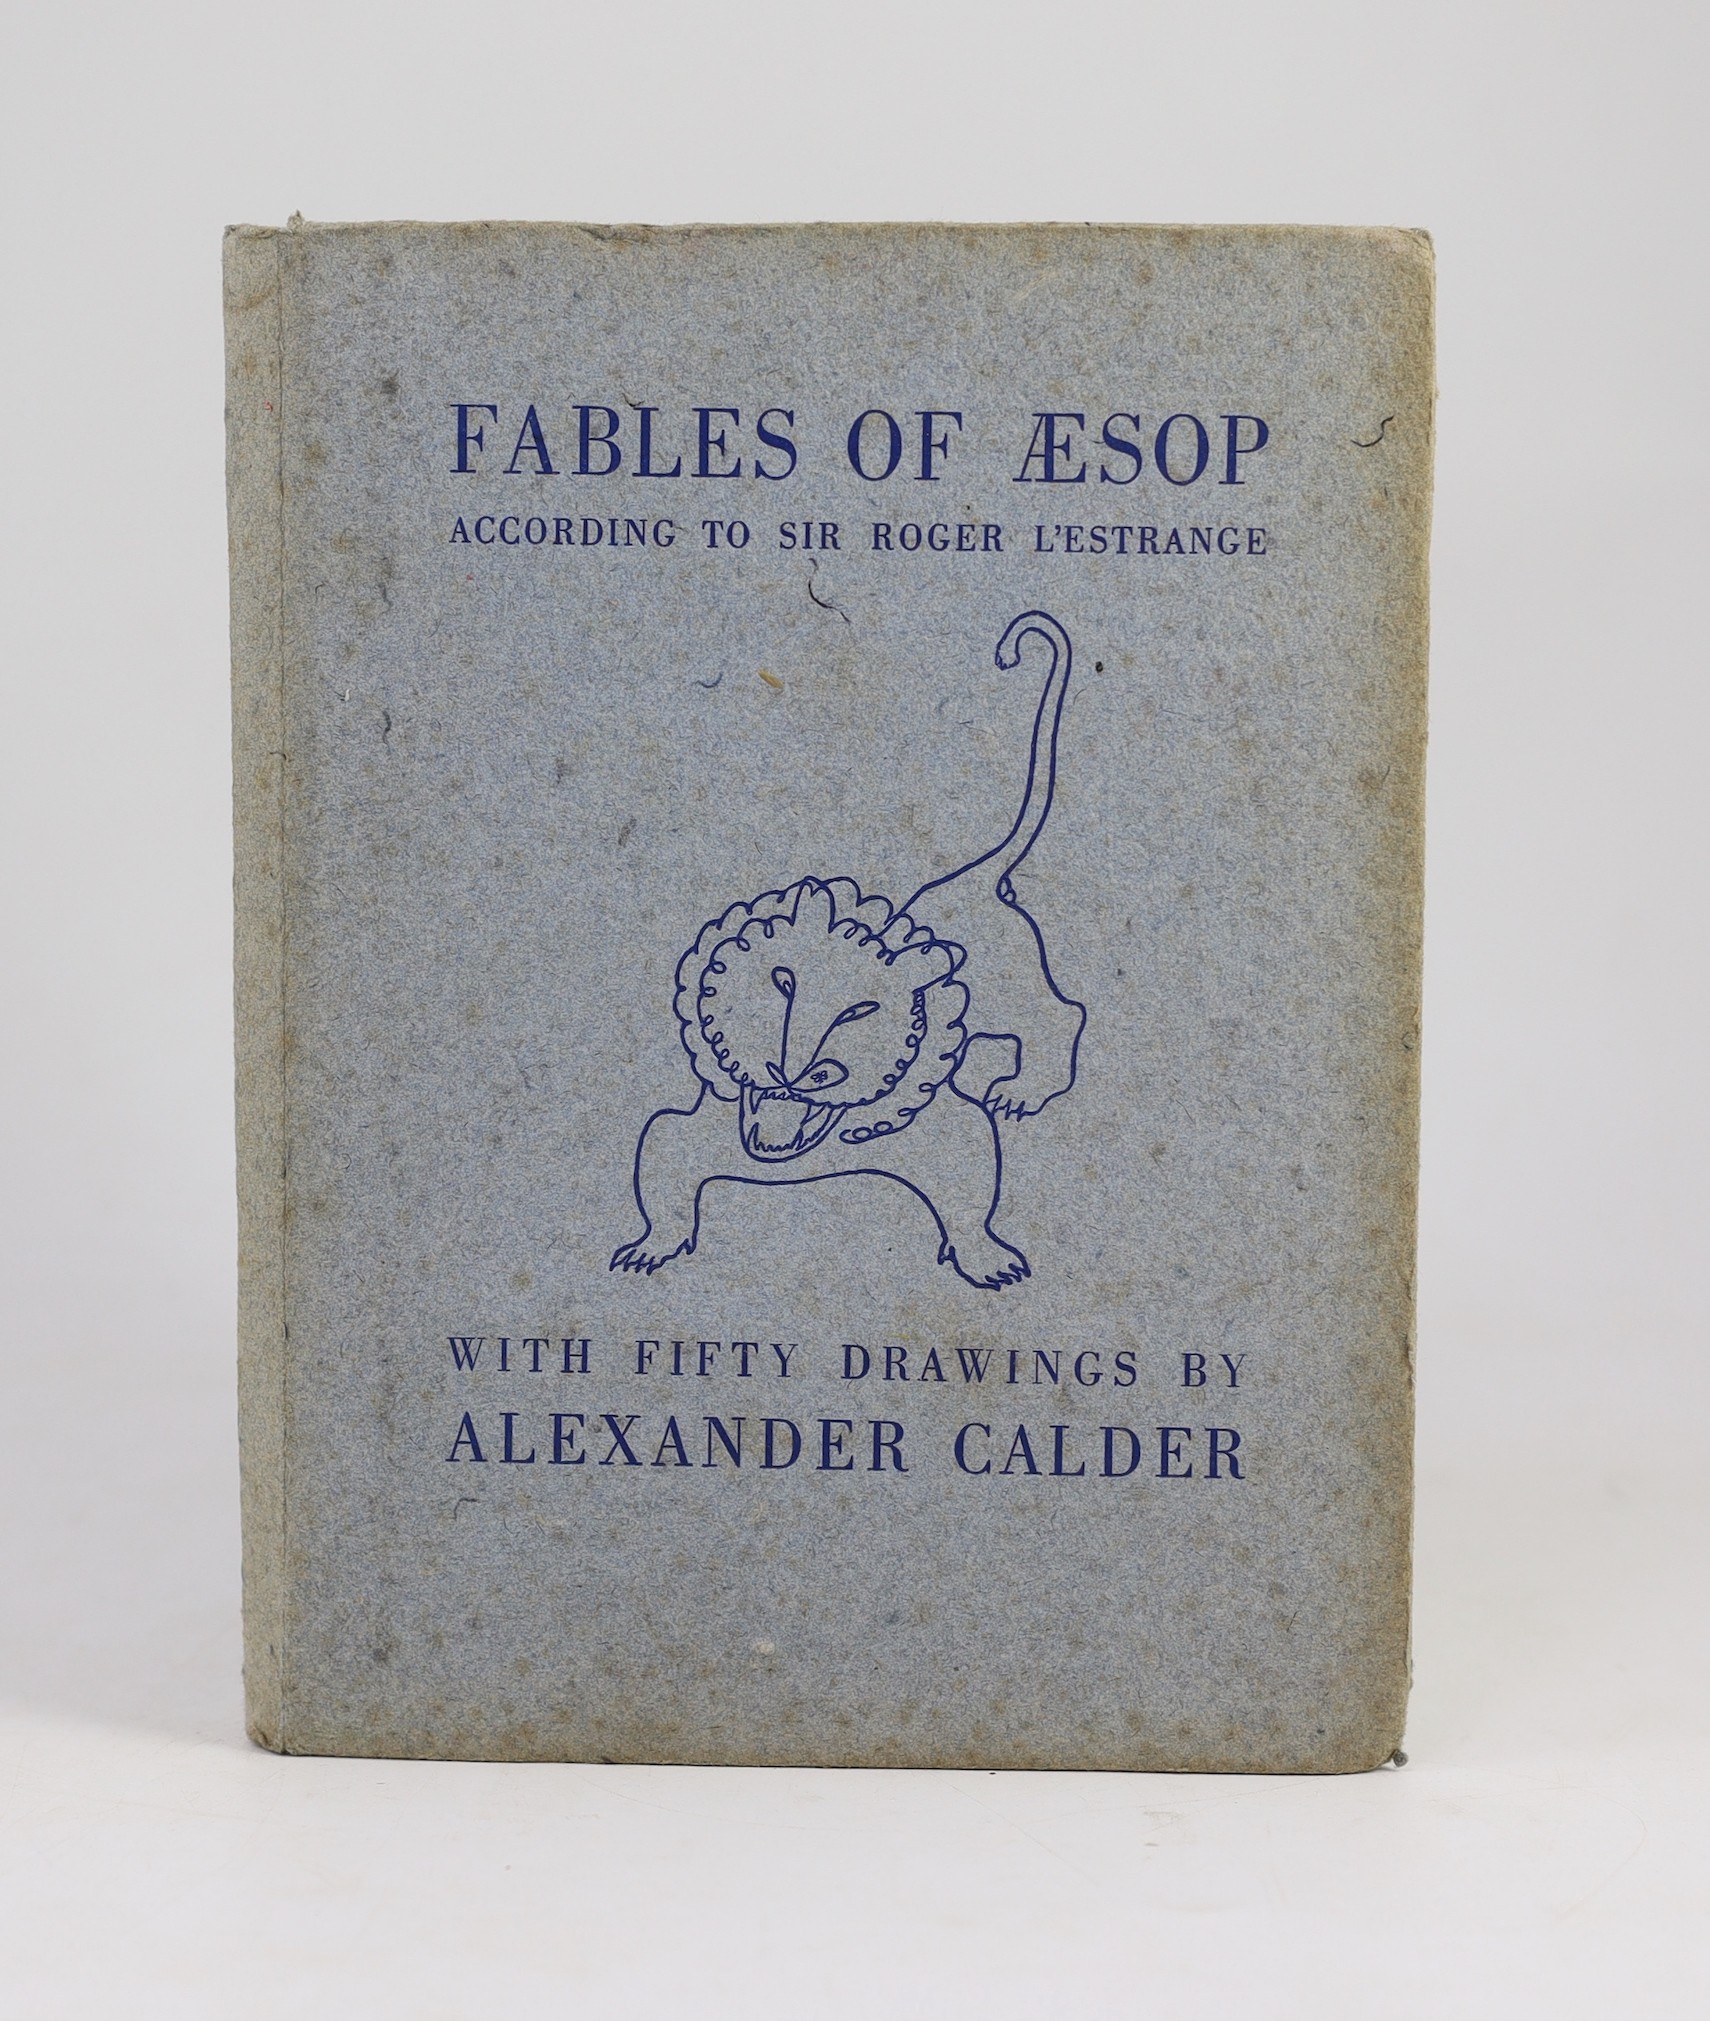 Aesop - Fables, one of 595, on Auverge handmade paper, illustrated by Alexander Calder, 4to, original boards in original d/j, Harrison of Paris, [1931]